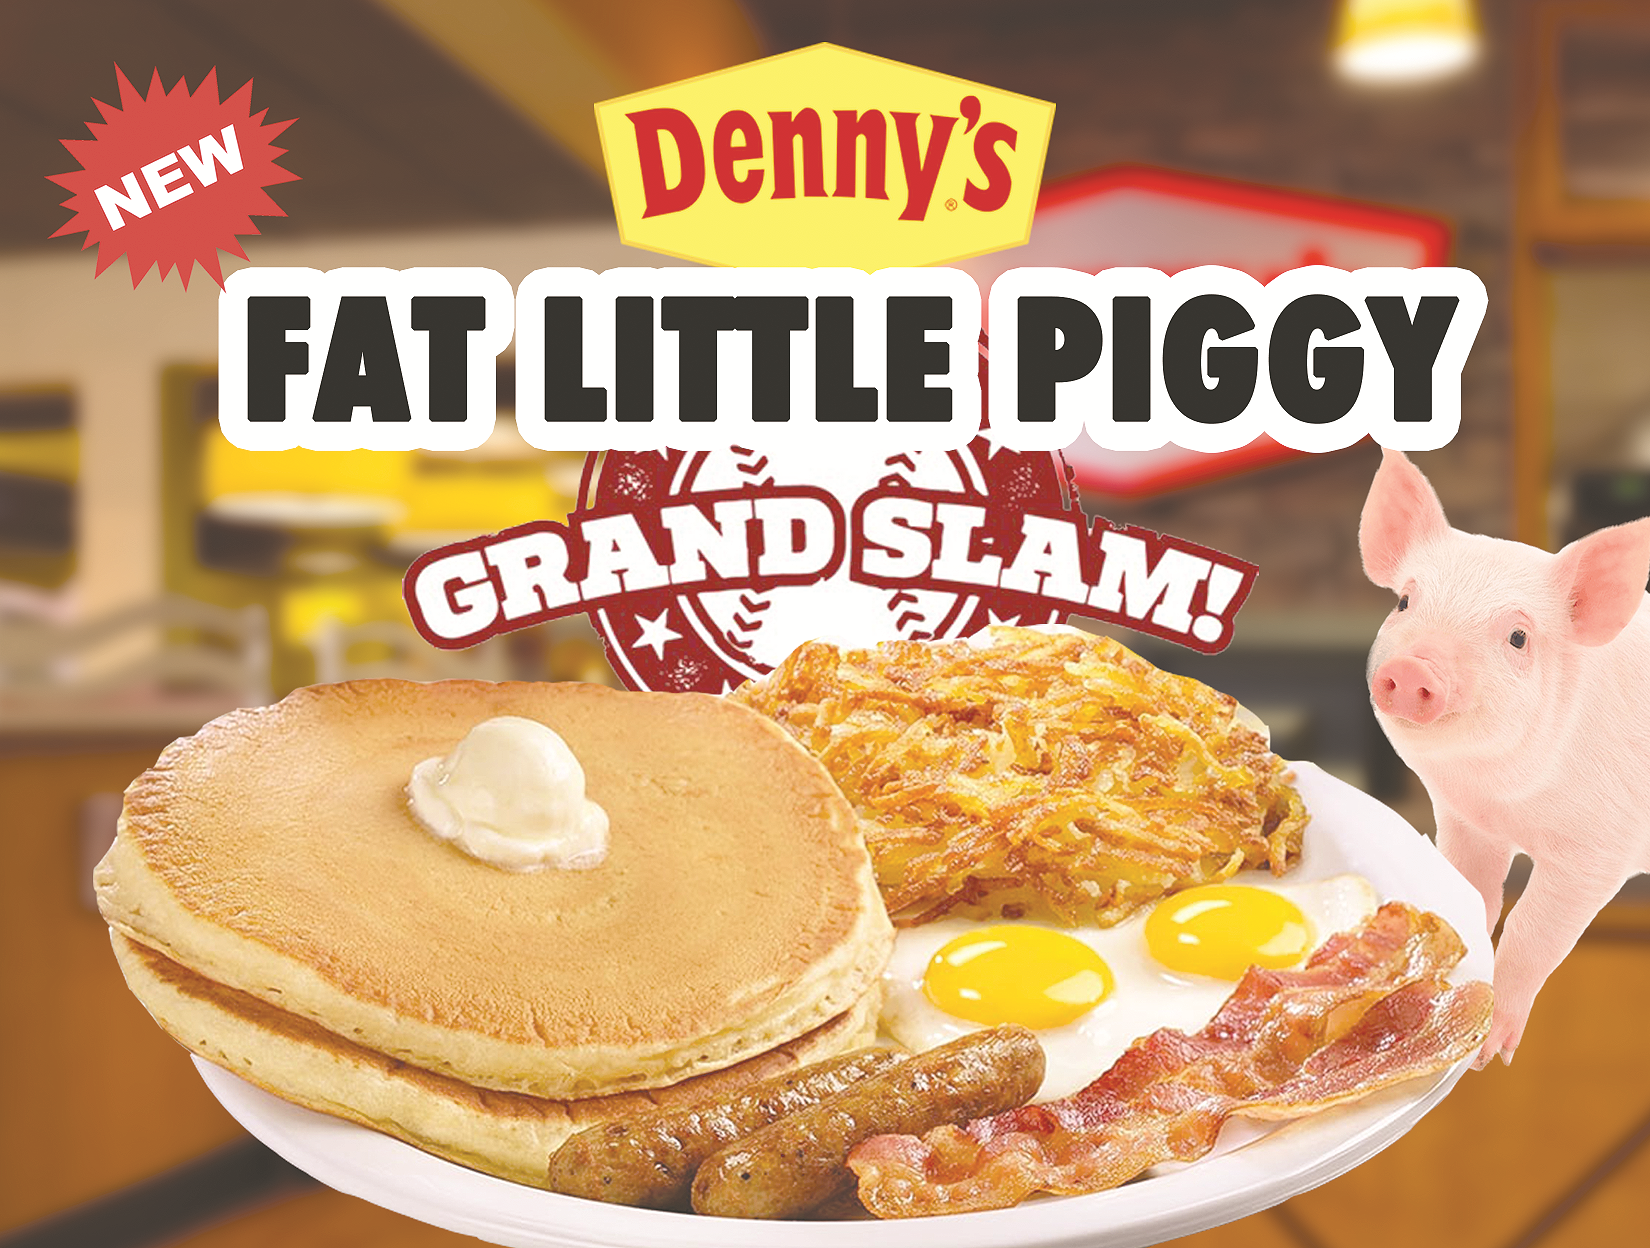 Denny's meal with a fat little piggy